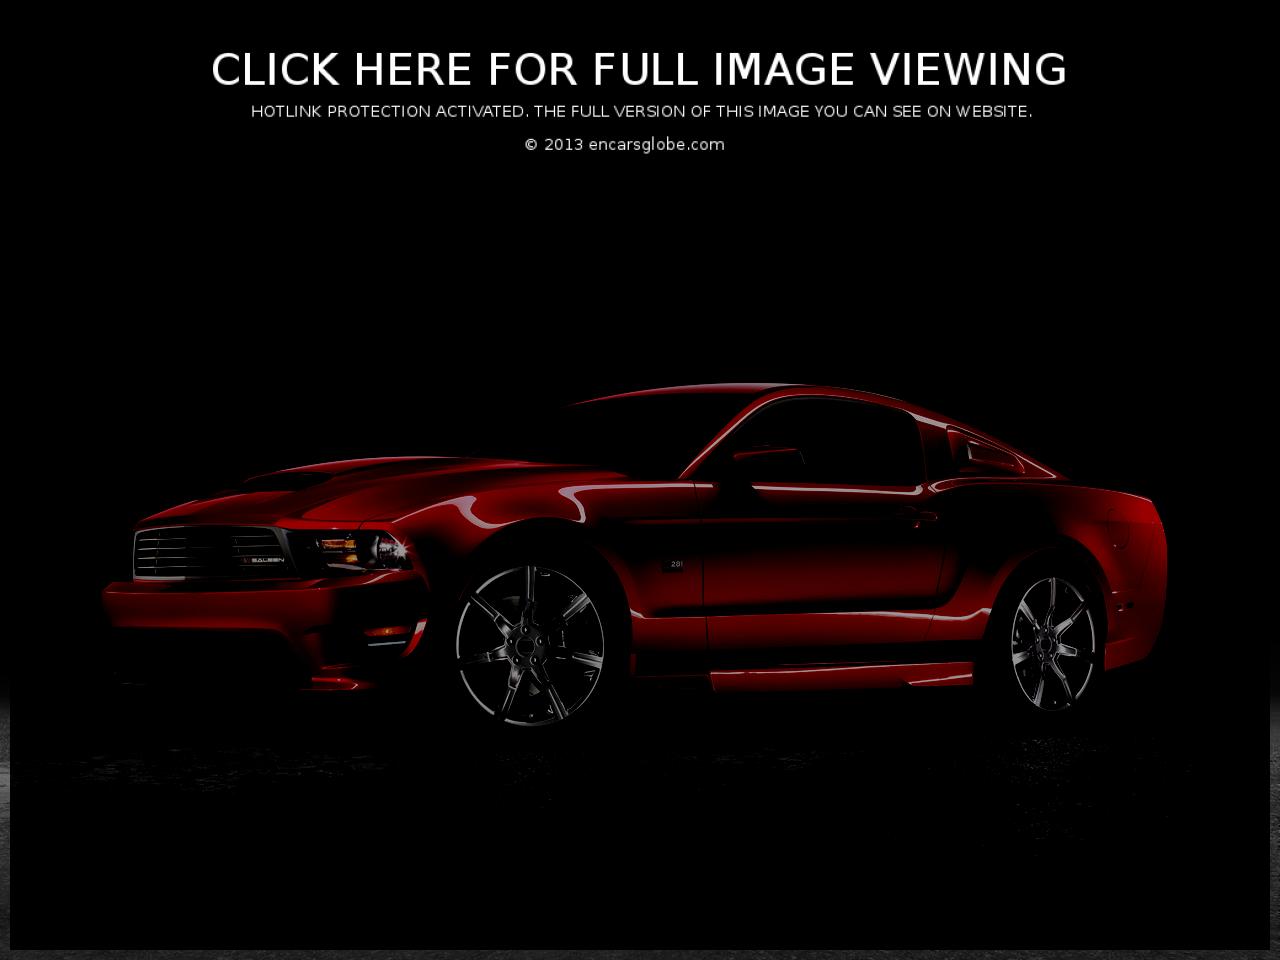 Saleen Mustang S281 Superchaged Photo Gallery: Photo #02 out of 7 ...